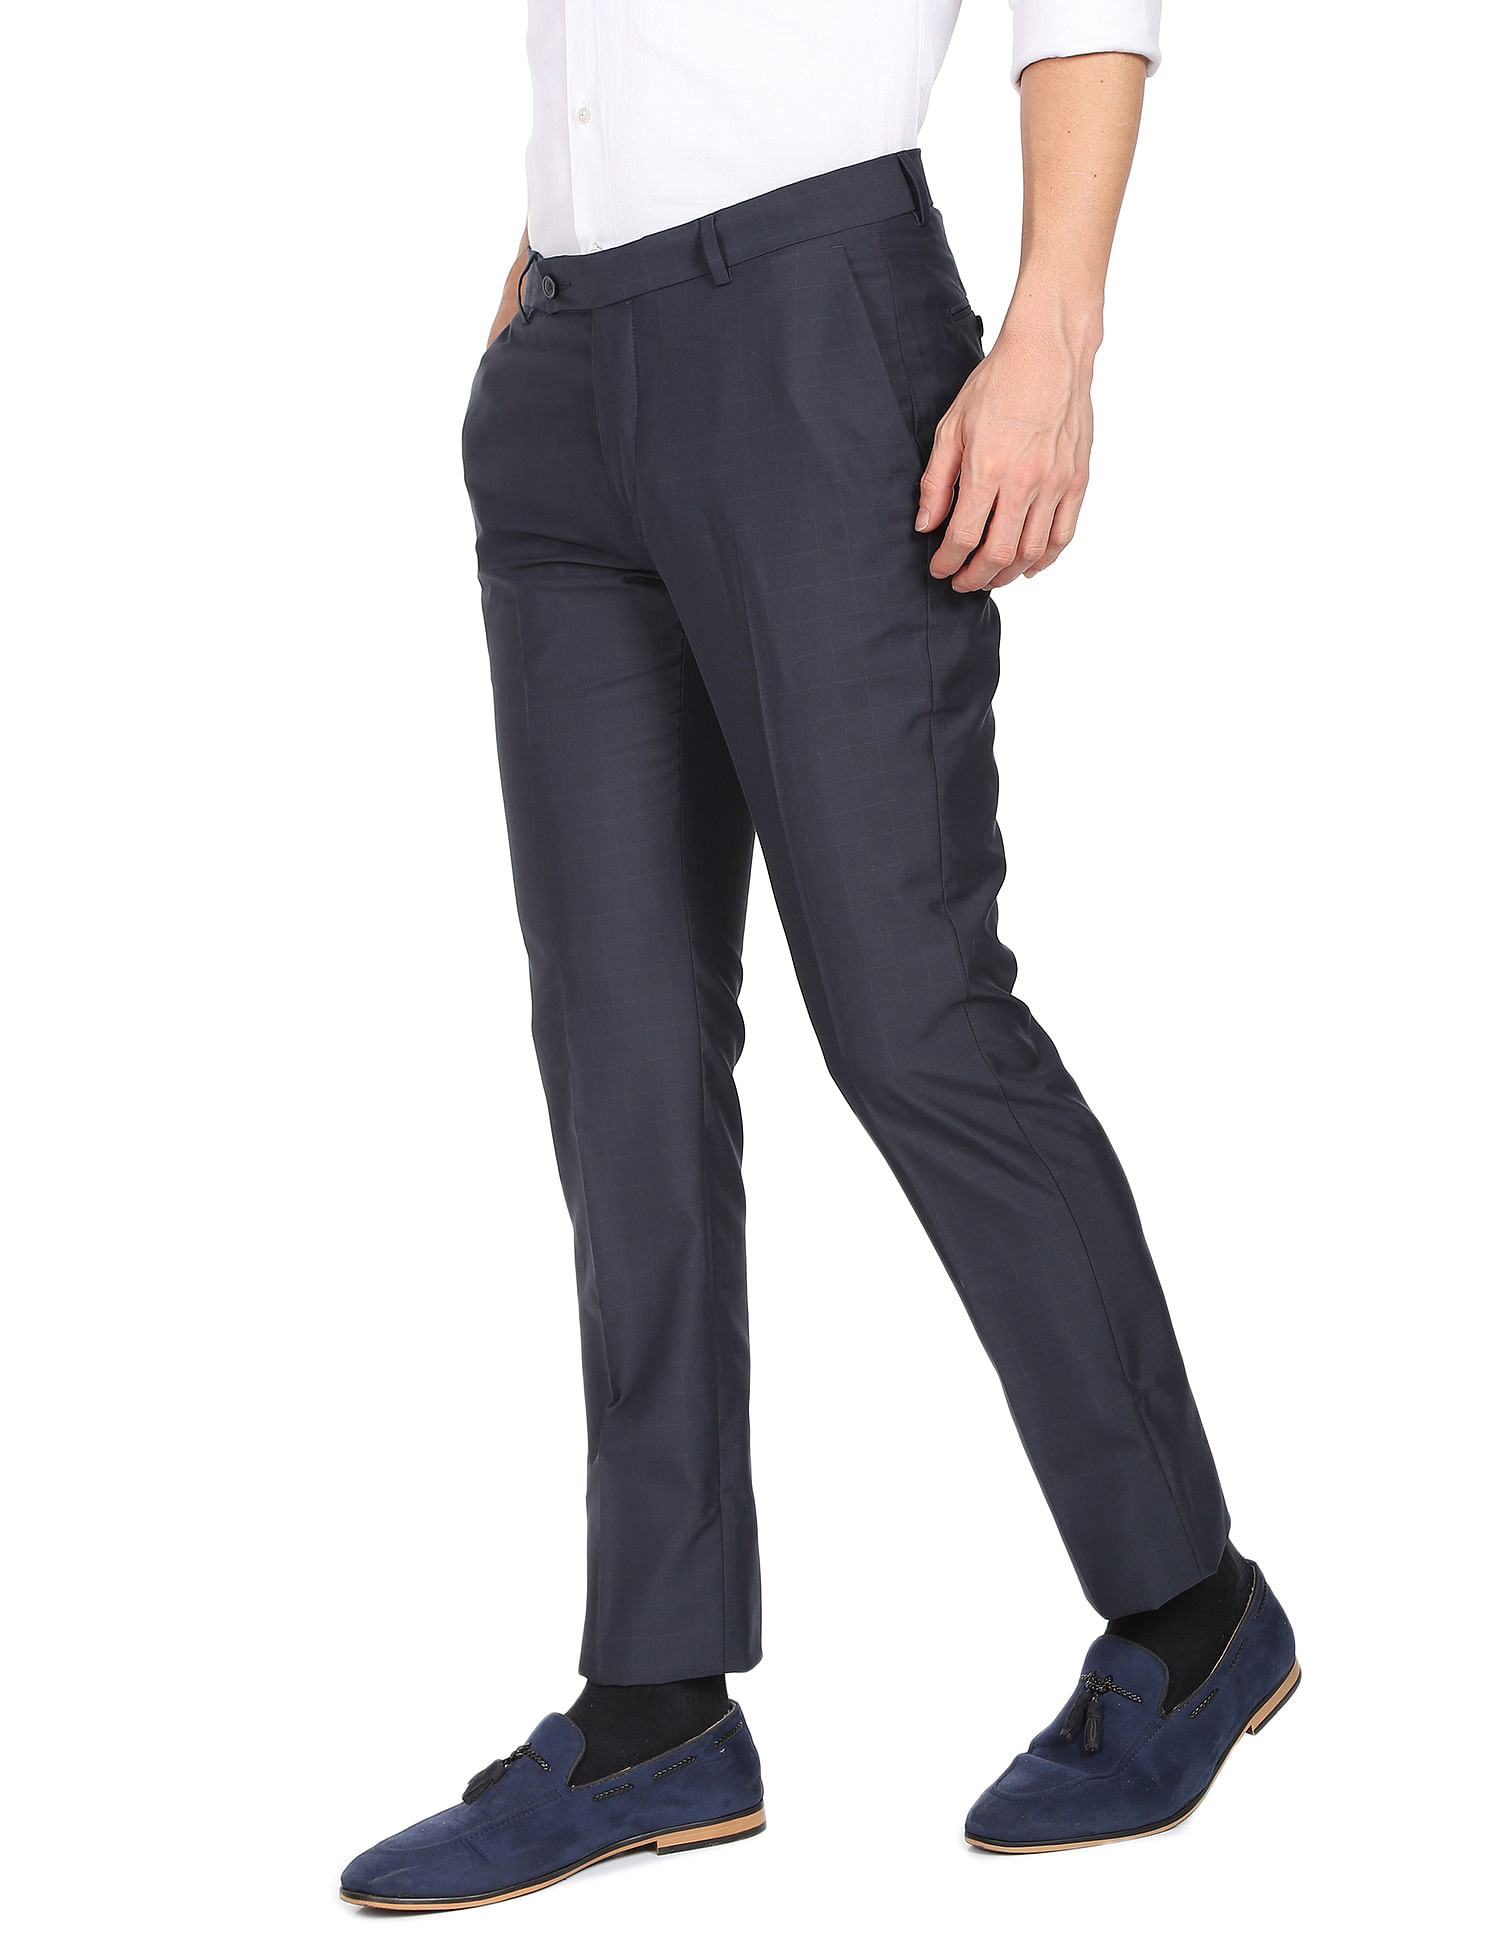 Decible Polyster Blend Formal Trousers For Man |formal Gray pants | grey pant  trousers for